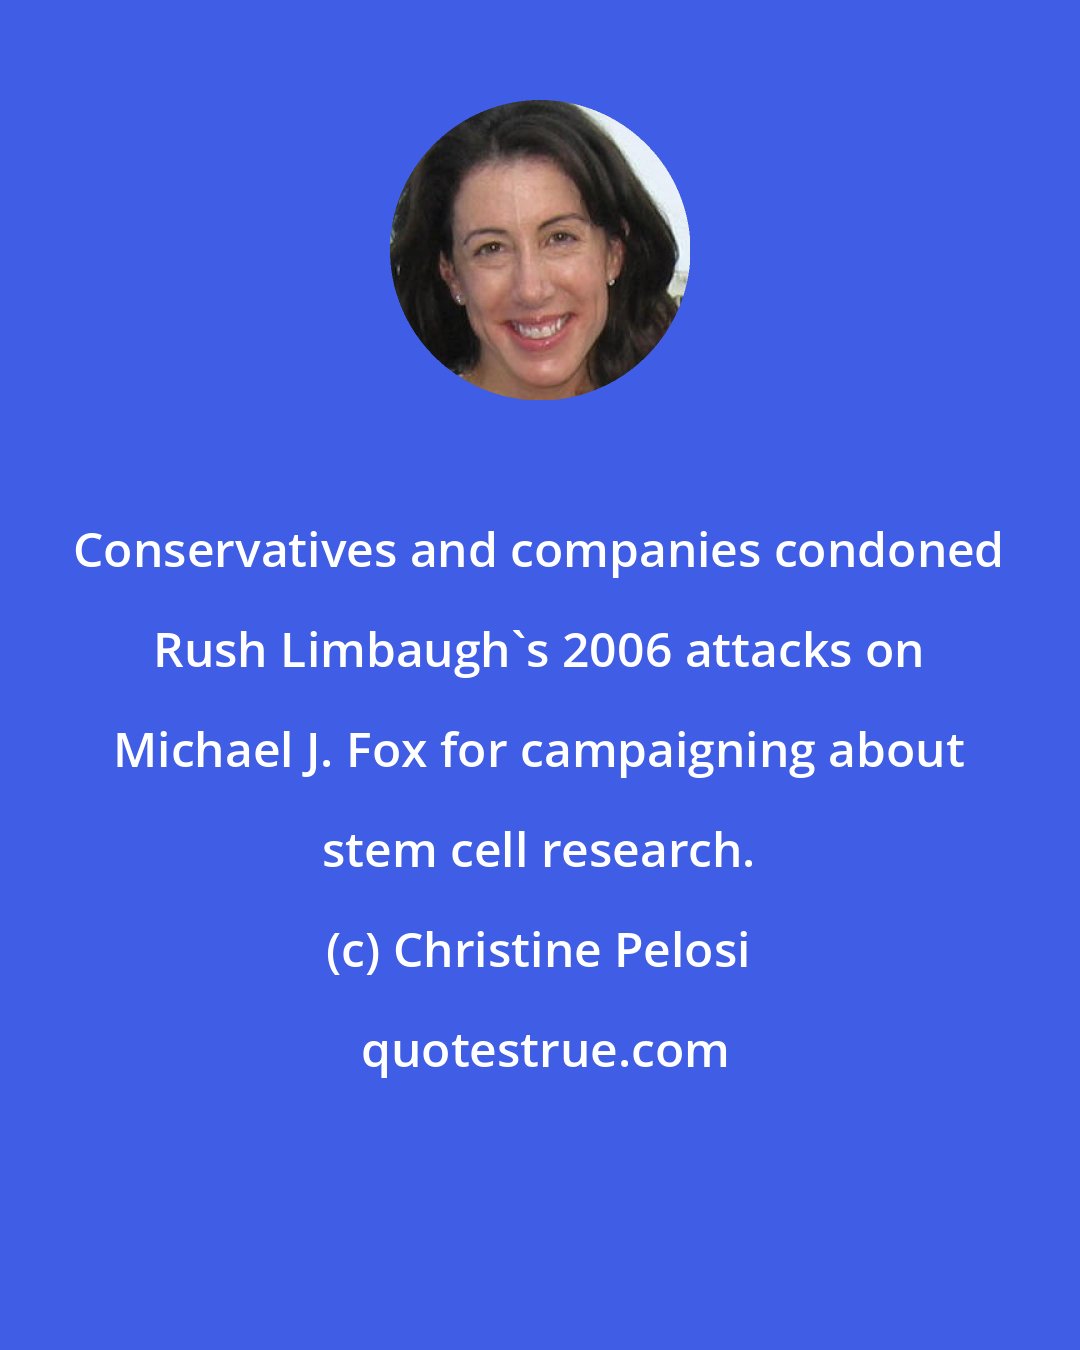 Christine Pelosi: Conservatives and companies condoned Rush Limbaugh's 2006 attacks on Michael J. Fox for campaigning about stem cell research.